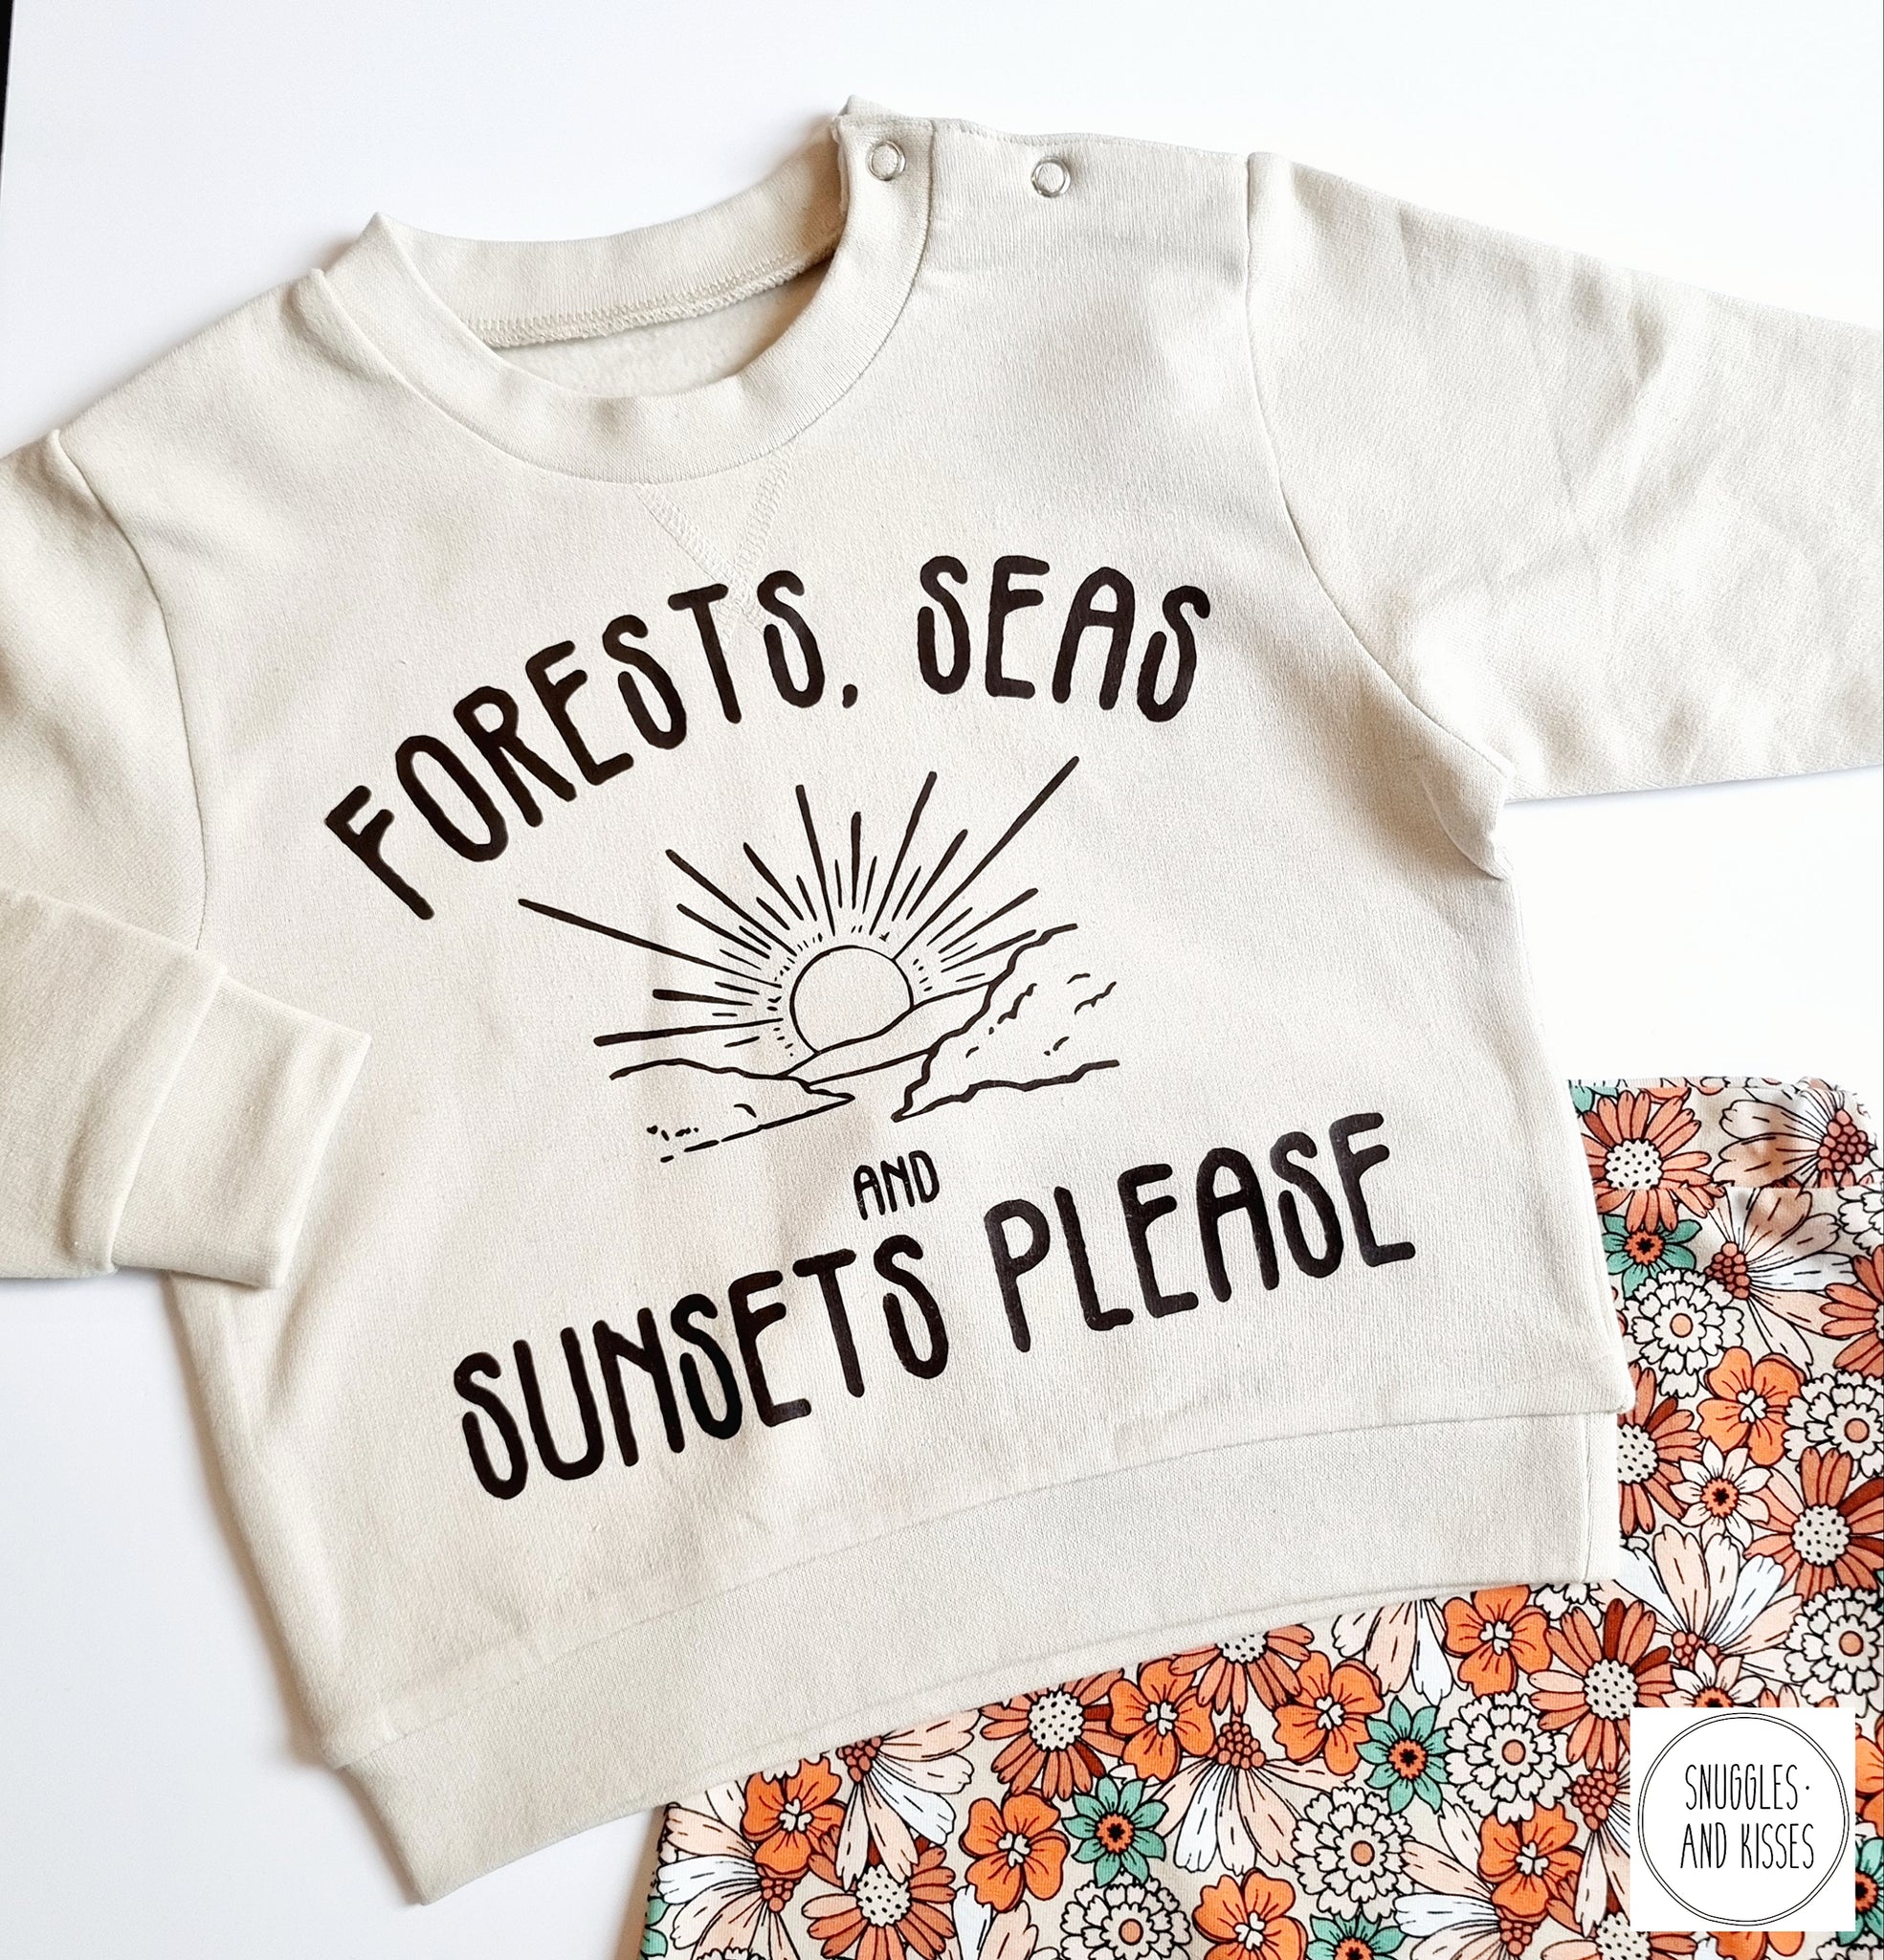 Kids 'Forests, Seas and Sunsets Please' Sweatshirt-New Design!